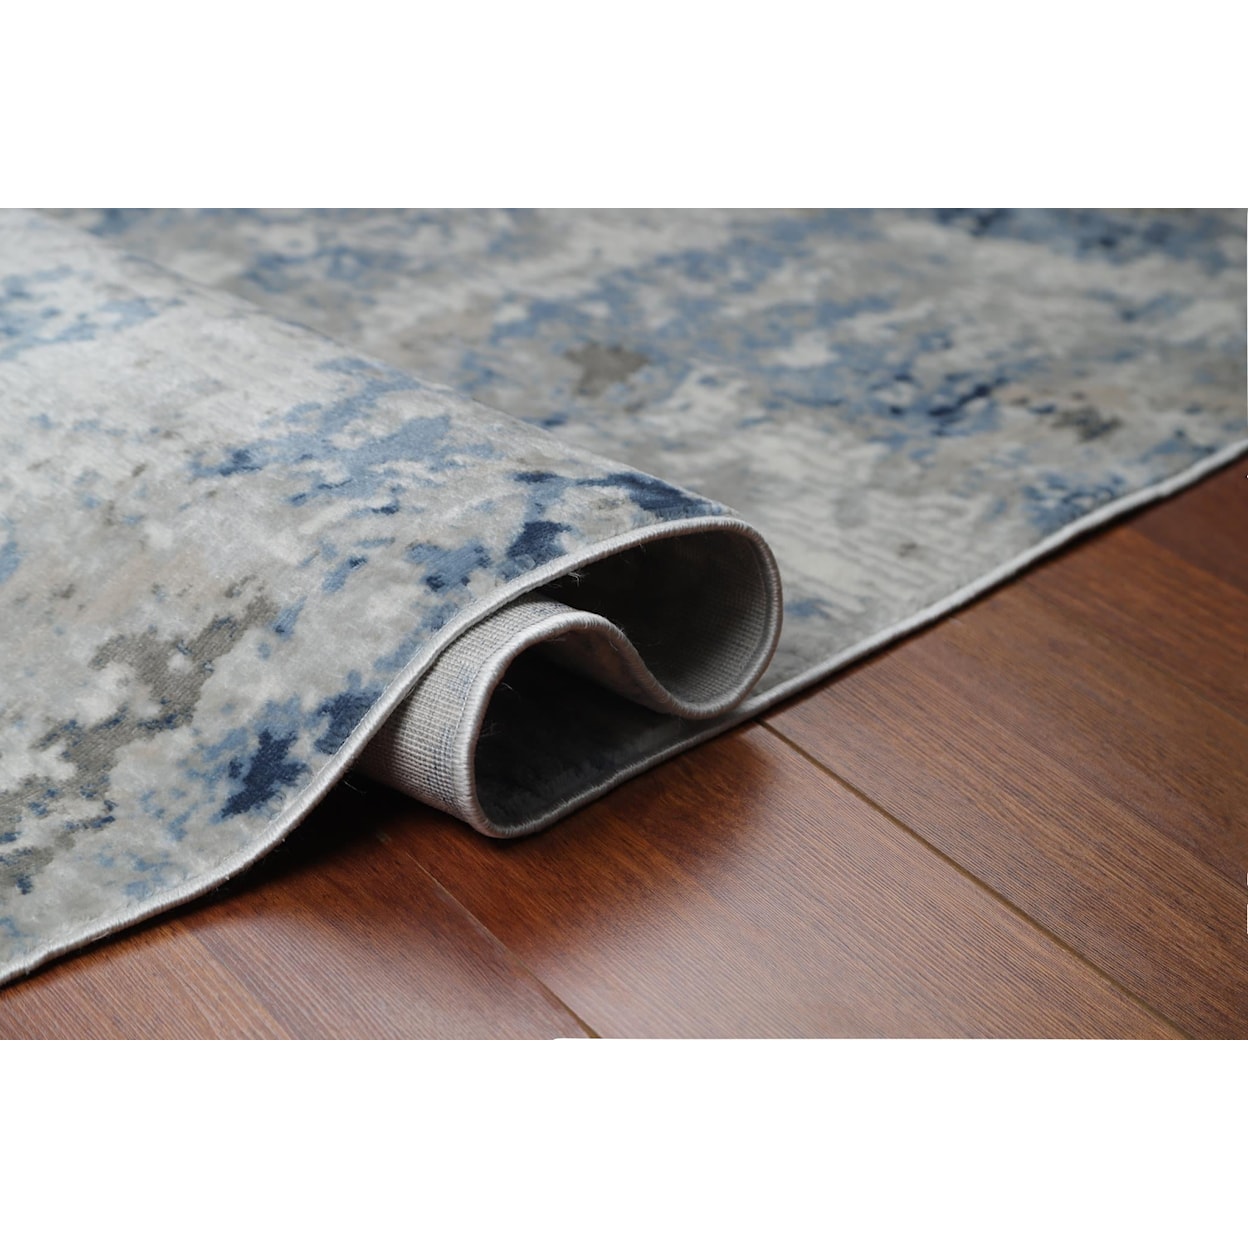 MDA Rugs Trendy Collection TRENDY 5X8 BLUE/GREY AREA RUG |